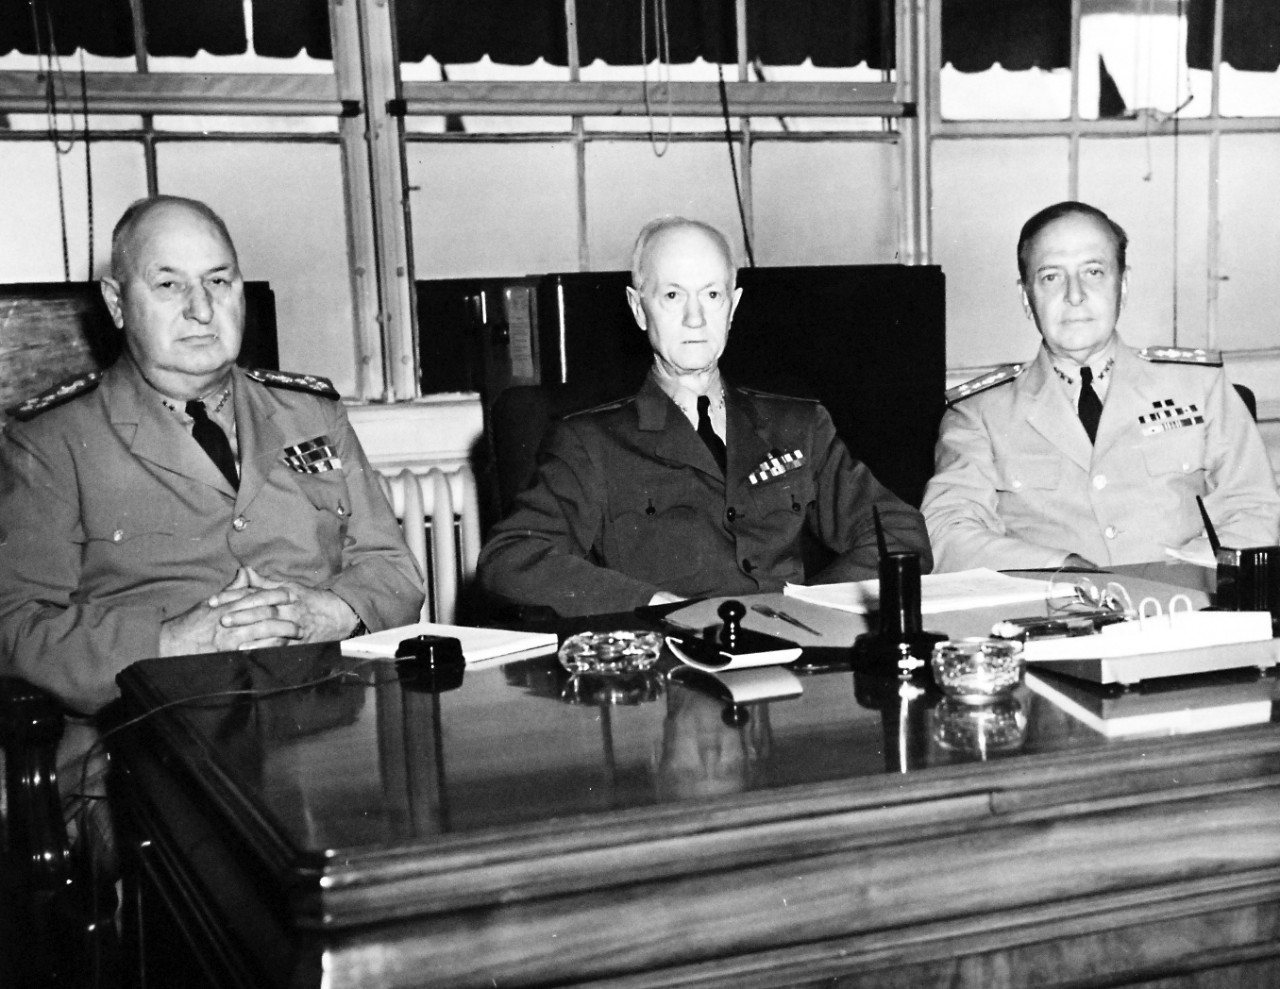 80-G-46137:   Members of the Court of Inquiry ordered by the Secretary of the Navy to inquire into the circumstances connected with the Japanese attack on Pearl Harbor are snapped as they sit in session in the Navy Department in Washington, D.C.  President of the Court is Admiral Orin G. Murfin, USN, (Retired), (center).  The other members are Admiral Edward C. Kalbfus, USN, (Retired), (left), and Vice Admiral Adolphus Andrews, USN, (Retired).  Released July 24, 1944.  U.S. Navy Photograph, now in the collections of the National Archives.  (2016/07/05).